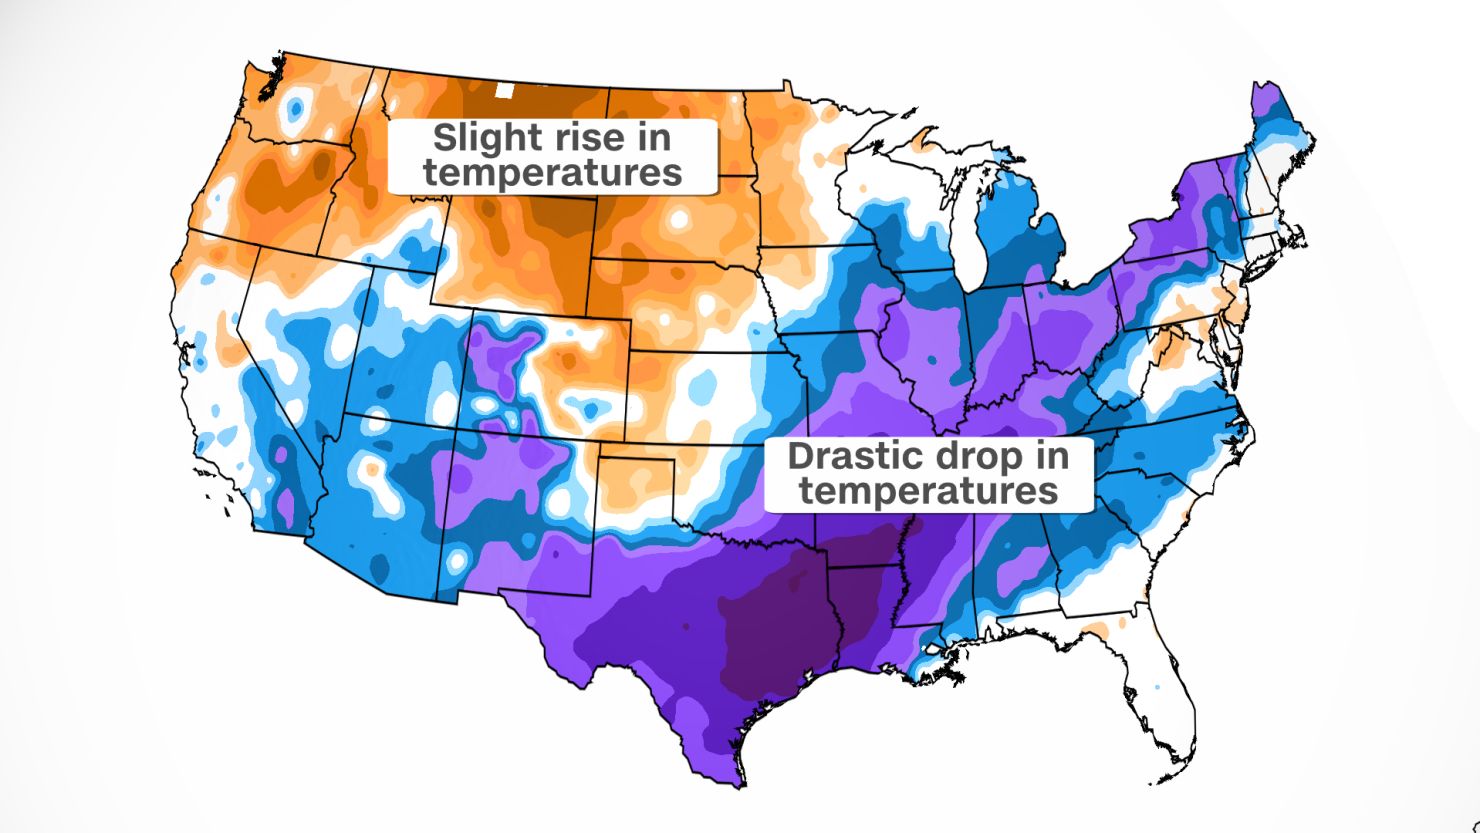 Many areas across the South experienced a dramatic temperature drop in 24 hours.